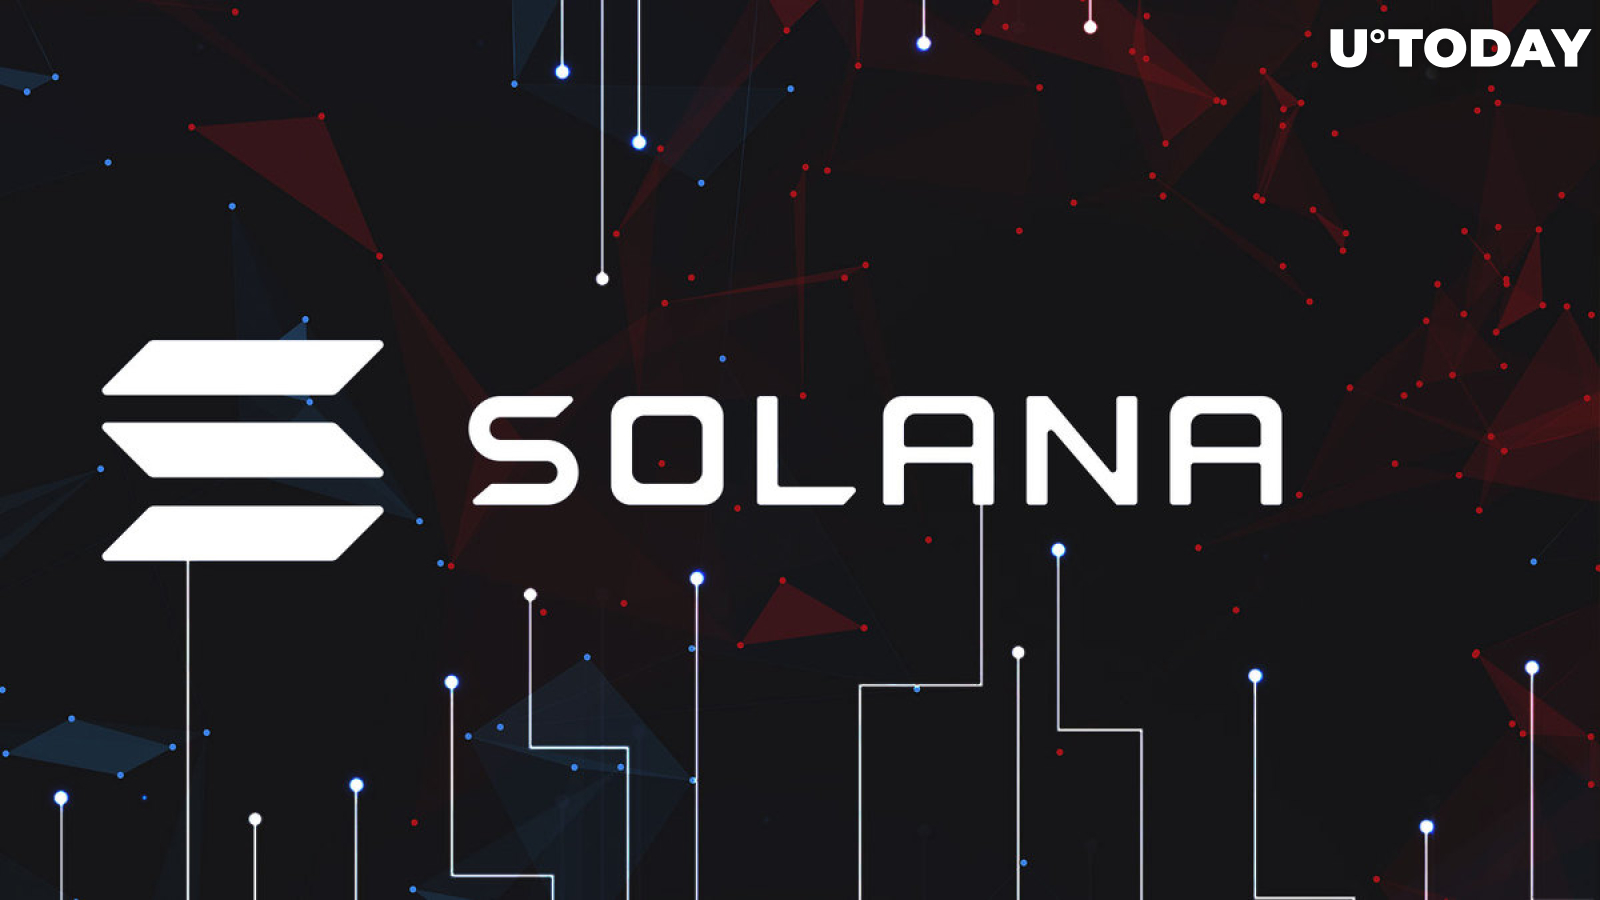 Solana Co-founder Points Out What Challenges Altcoin Will Face in 2023